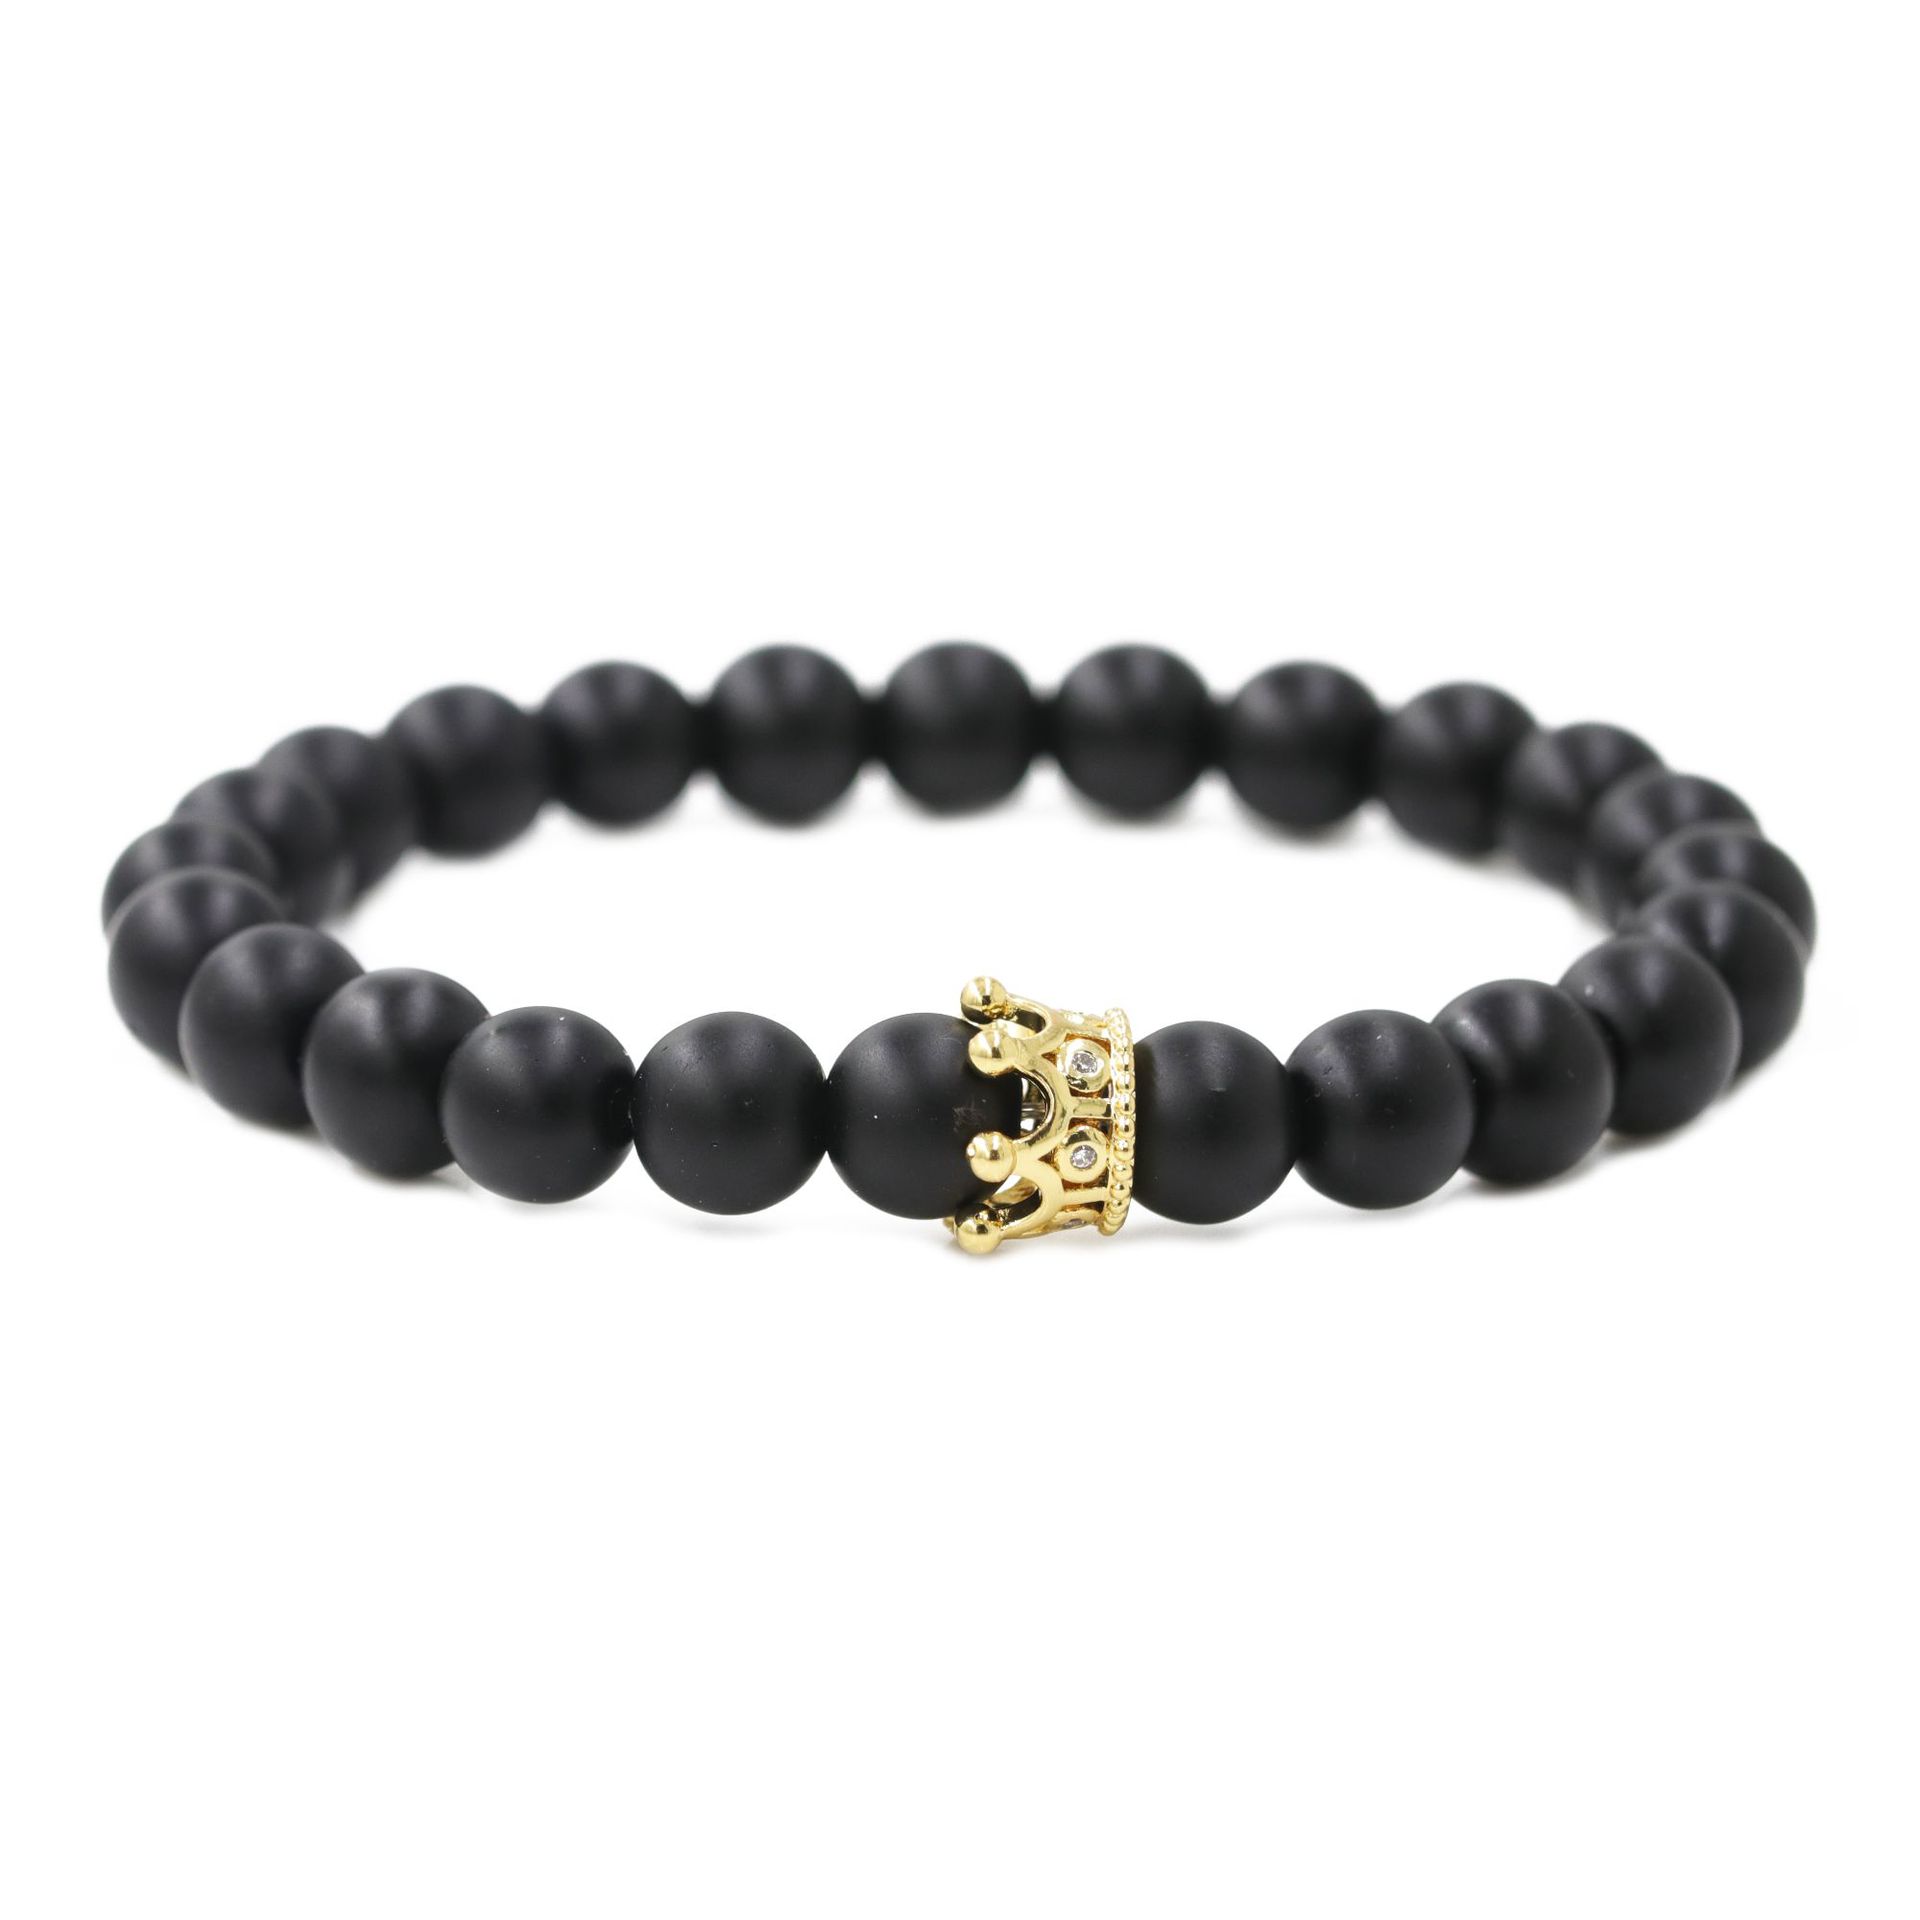 Matte Black Stone/gold color plated